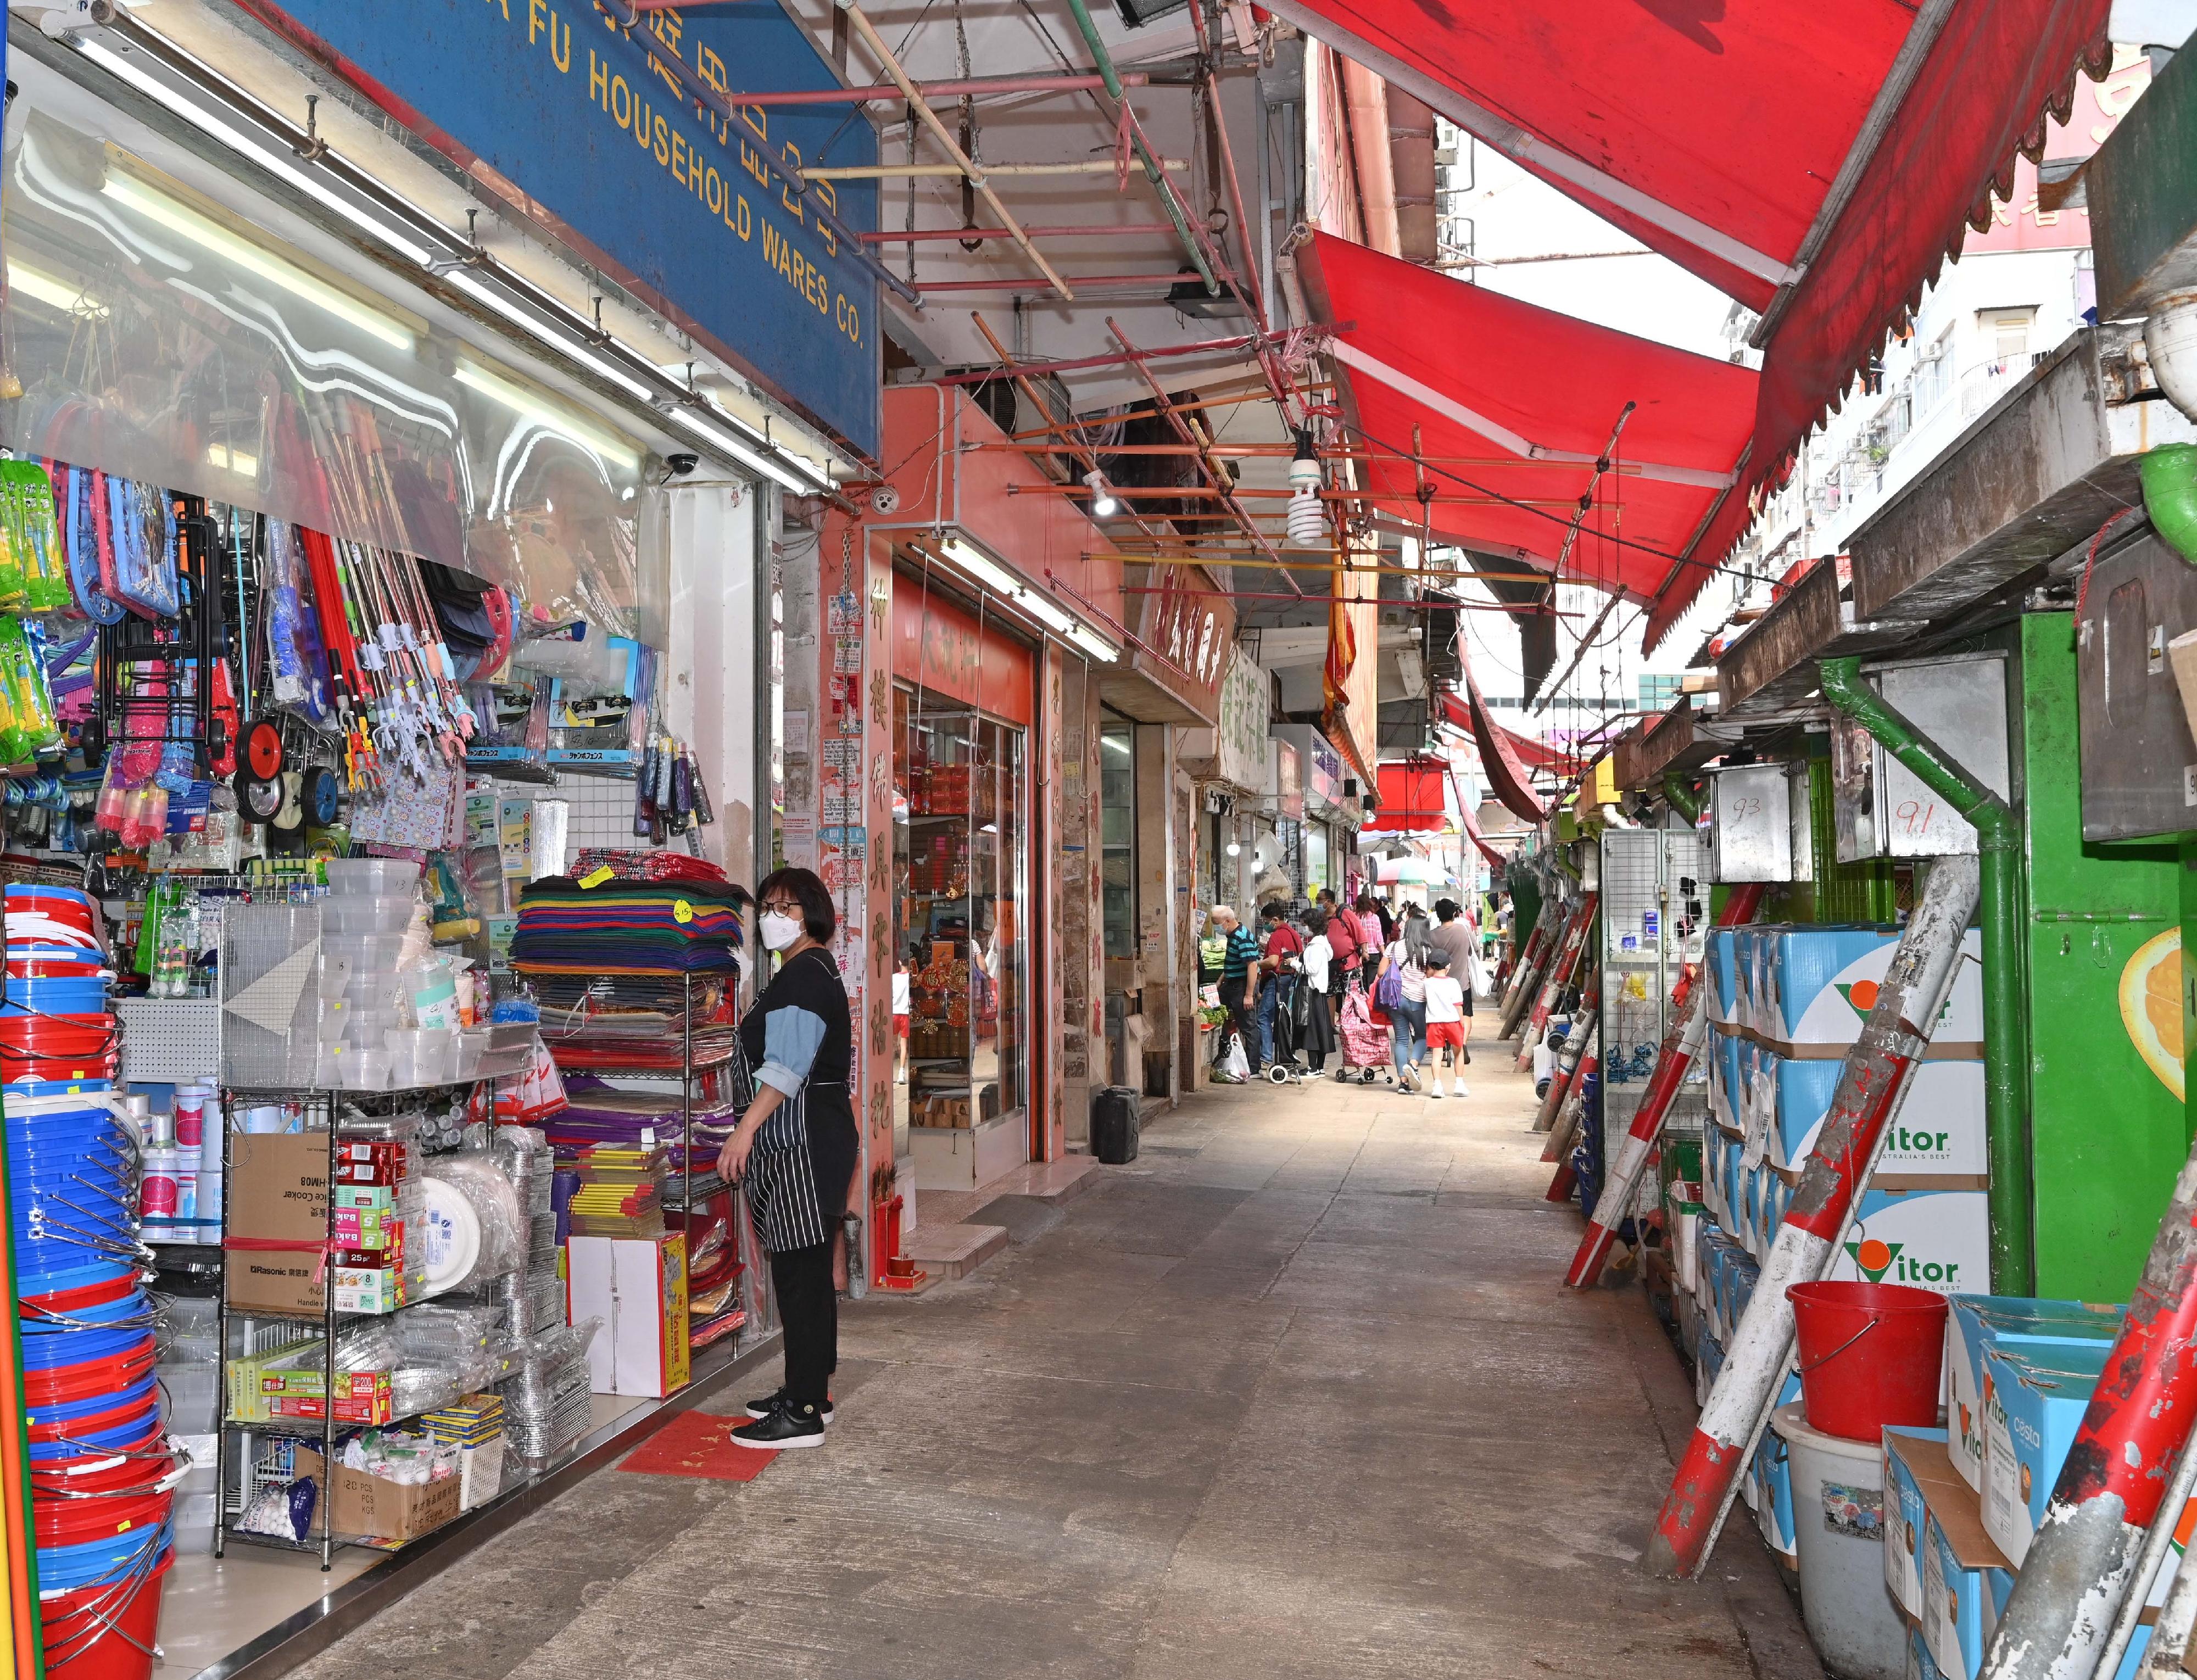 A spokesman for the Food and Environmental Hygiene Department (FEHD) said today (October 24) that the FEHD and the Hong Kong Police Force have conducted a series of stringent enforcement actions against illegal shop front extension activities in various districts since October 3. Photo shows the condition of a street in the Yau Tsim district after a joint operation.